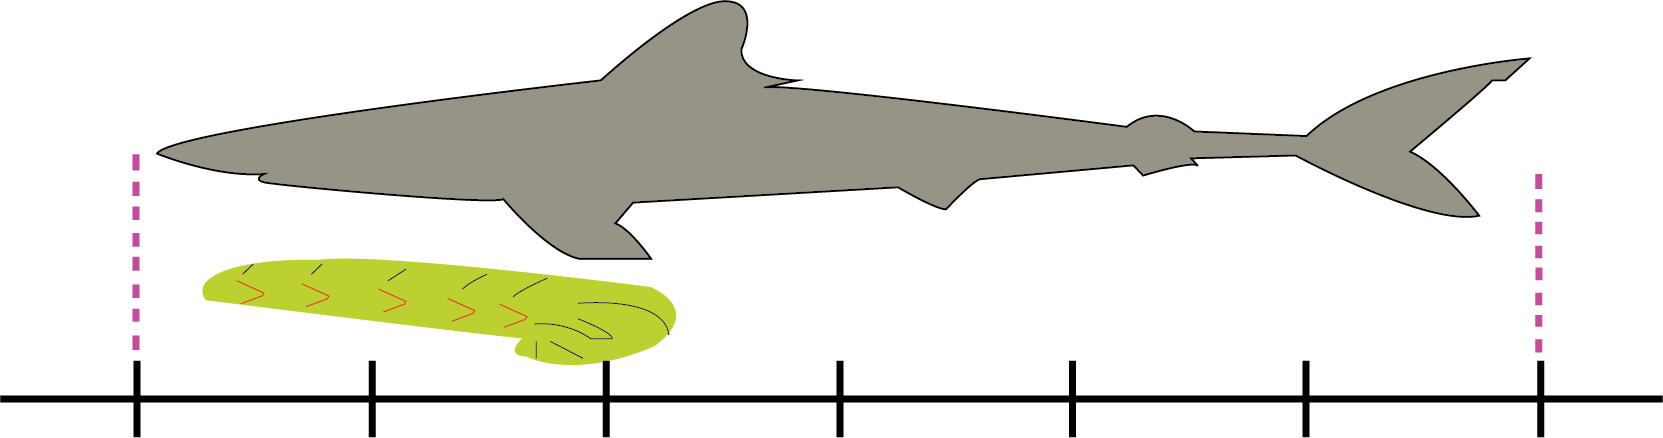 Length Comparison of the Shark and the Caterpillar